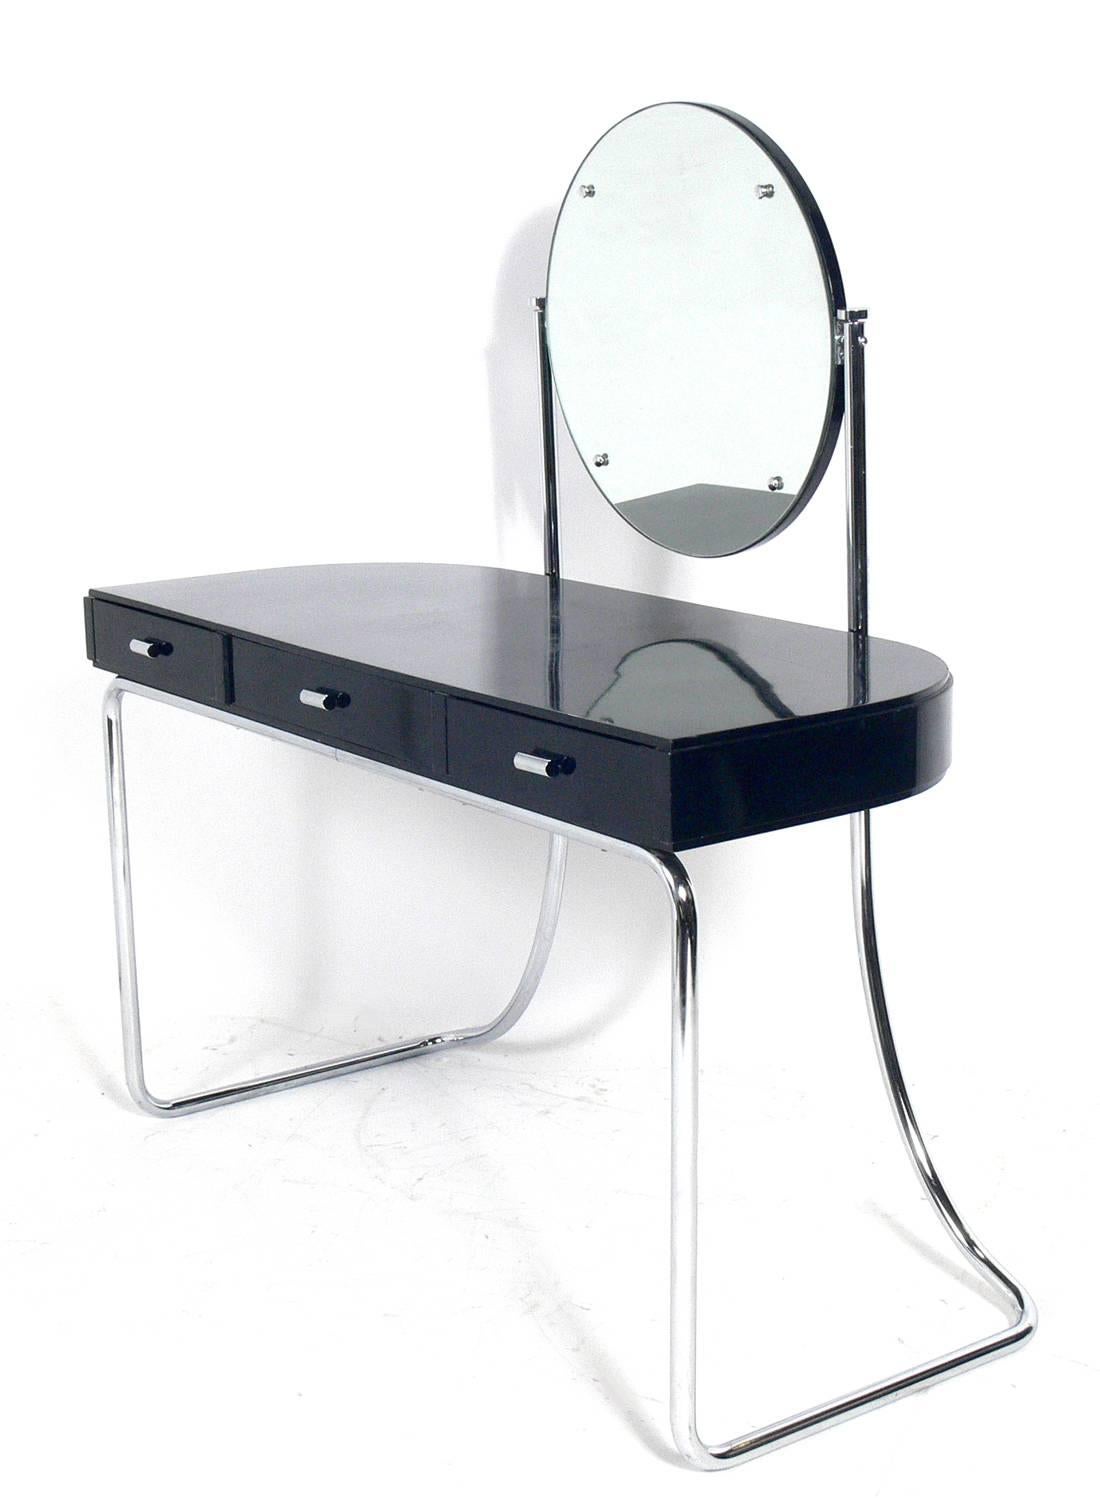 Art Deco black and chrome vanity attributed to Marcel Breuer for Venesta Sumnot, circa 1930s. Makers mark underneath. See detail photo. It retains the original black lacquer finish. The vanity stool measures 18